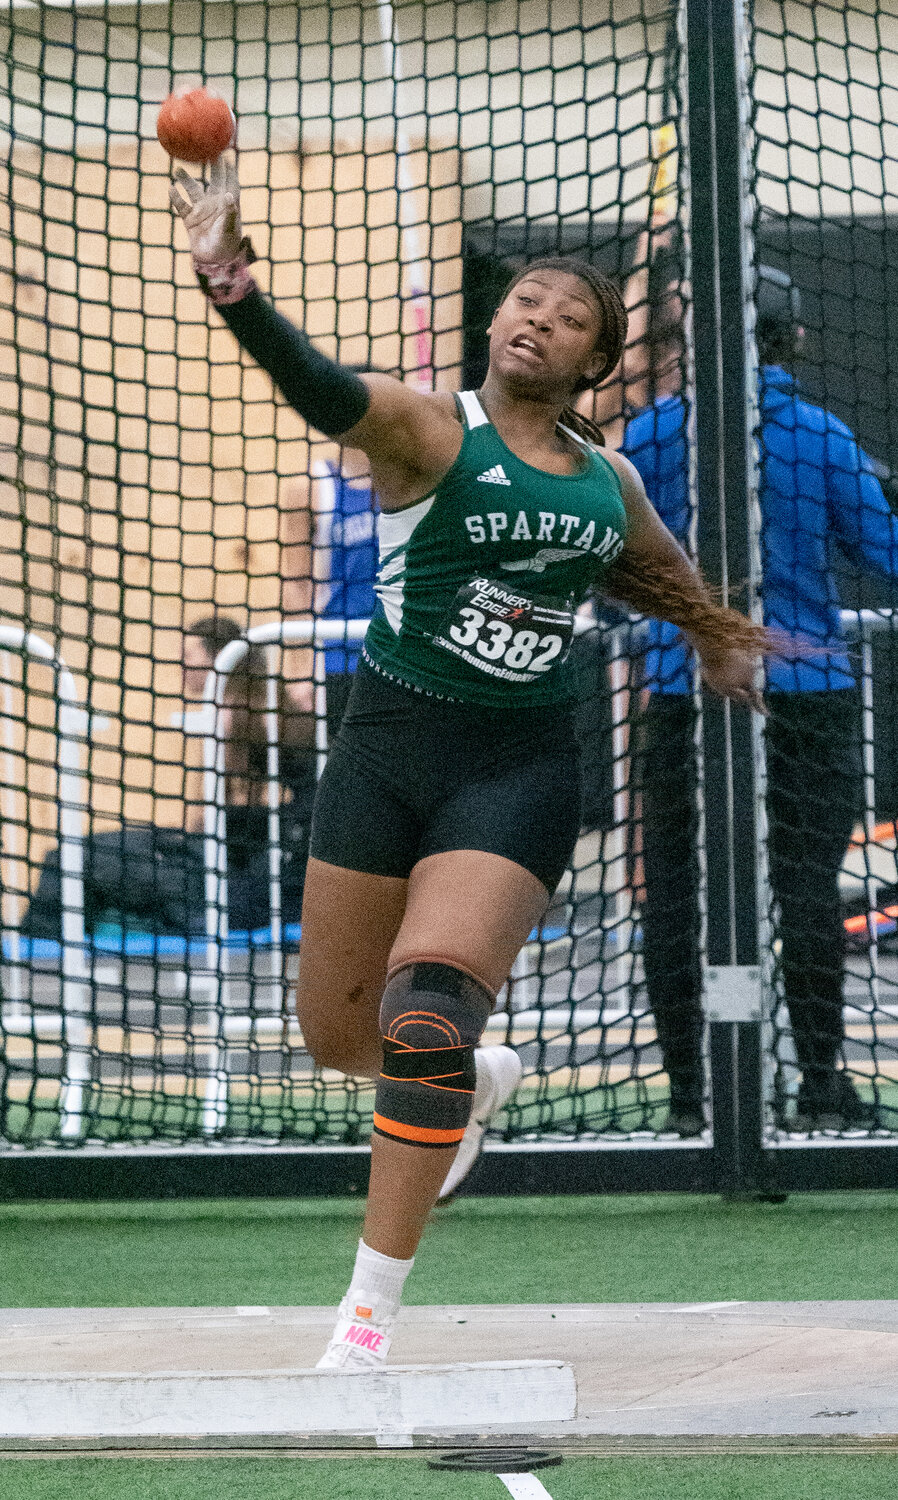 Moanna Thelusca cleared 34 feet to win the Nassau Class B shot put crown and helped lead the Spartans to a runner-up finish.